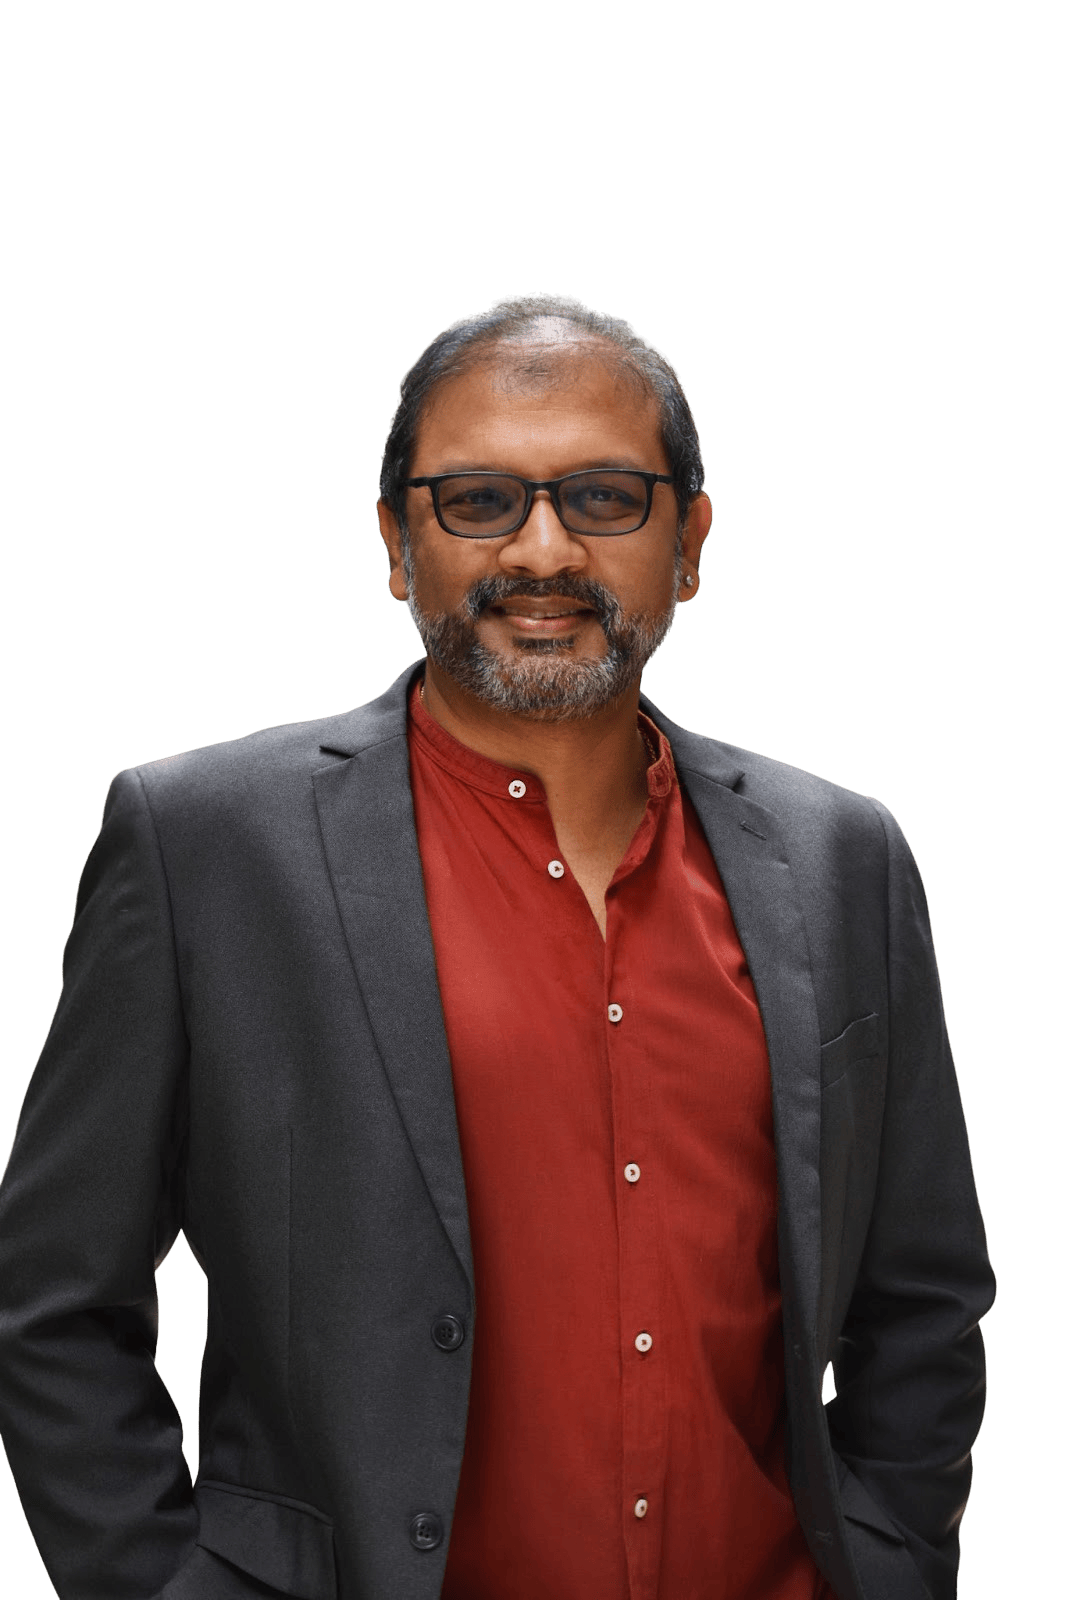 Dr. Prem Kumar - accredited Psychotherapist and Counselor, and Clinical Supervisor, in addiction treatment and mental health administration